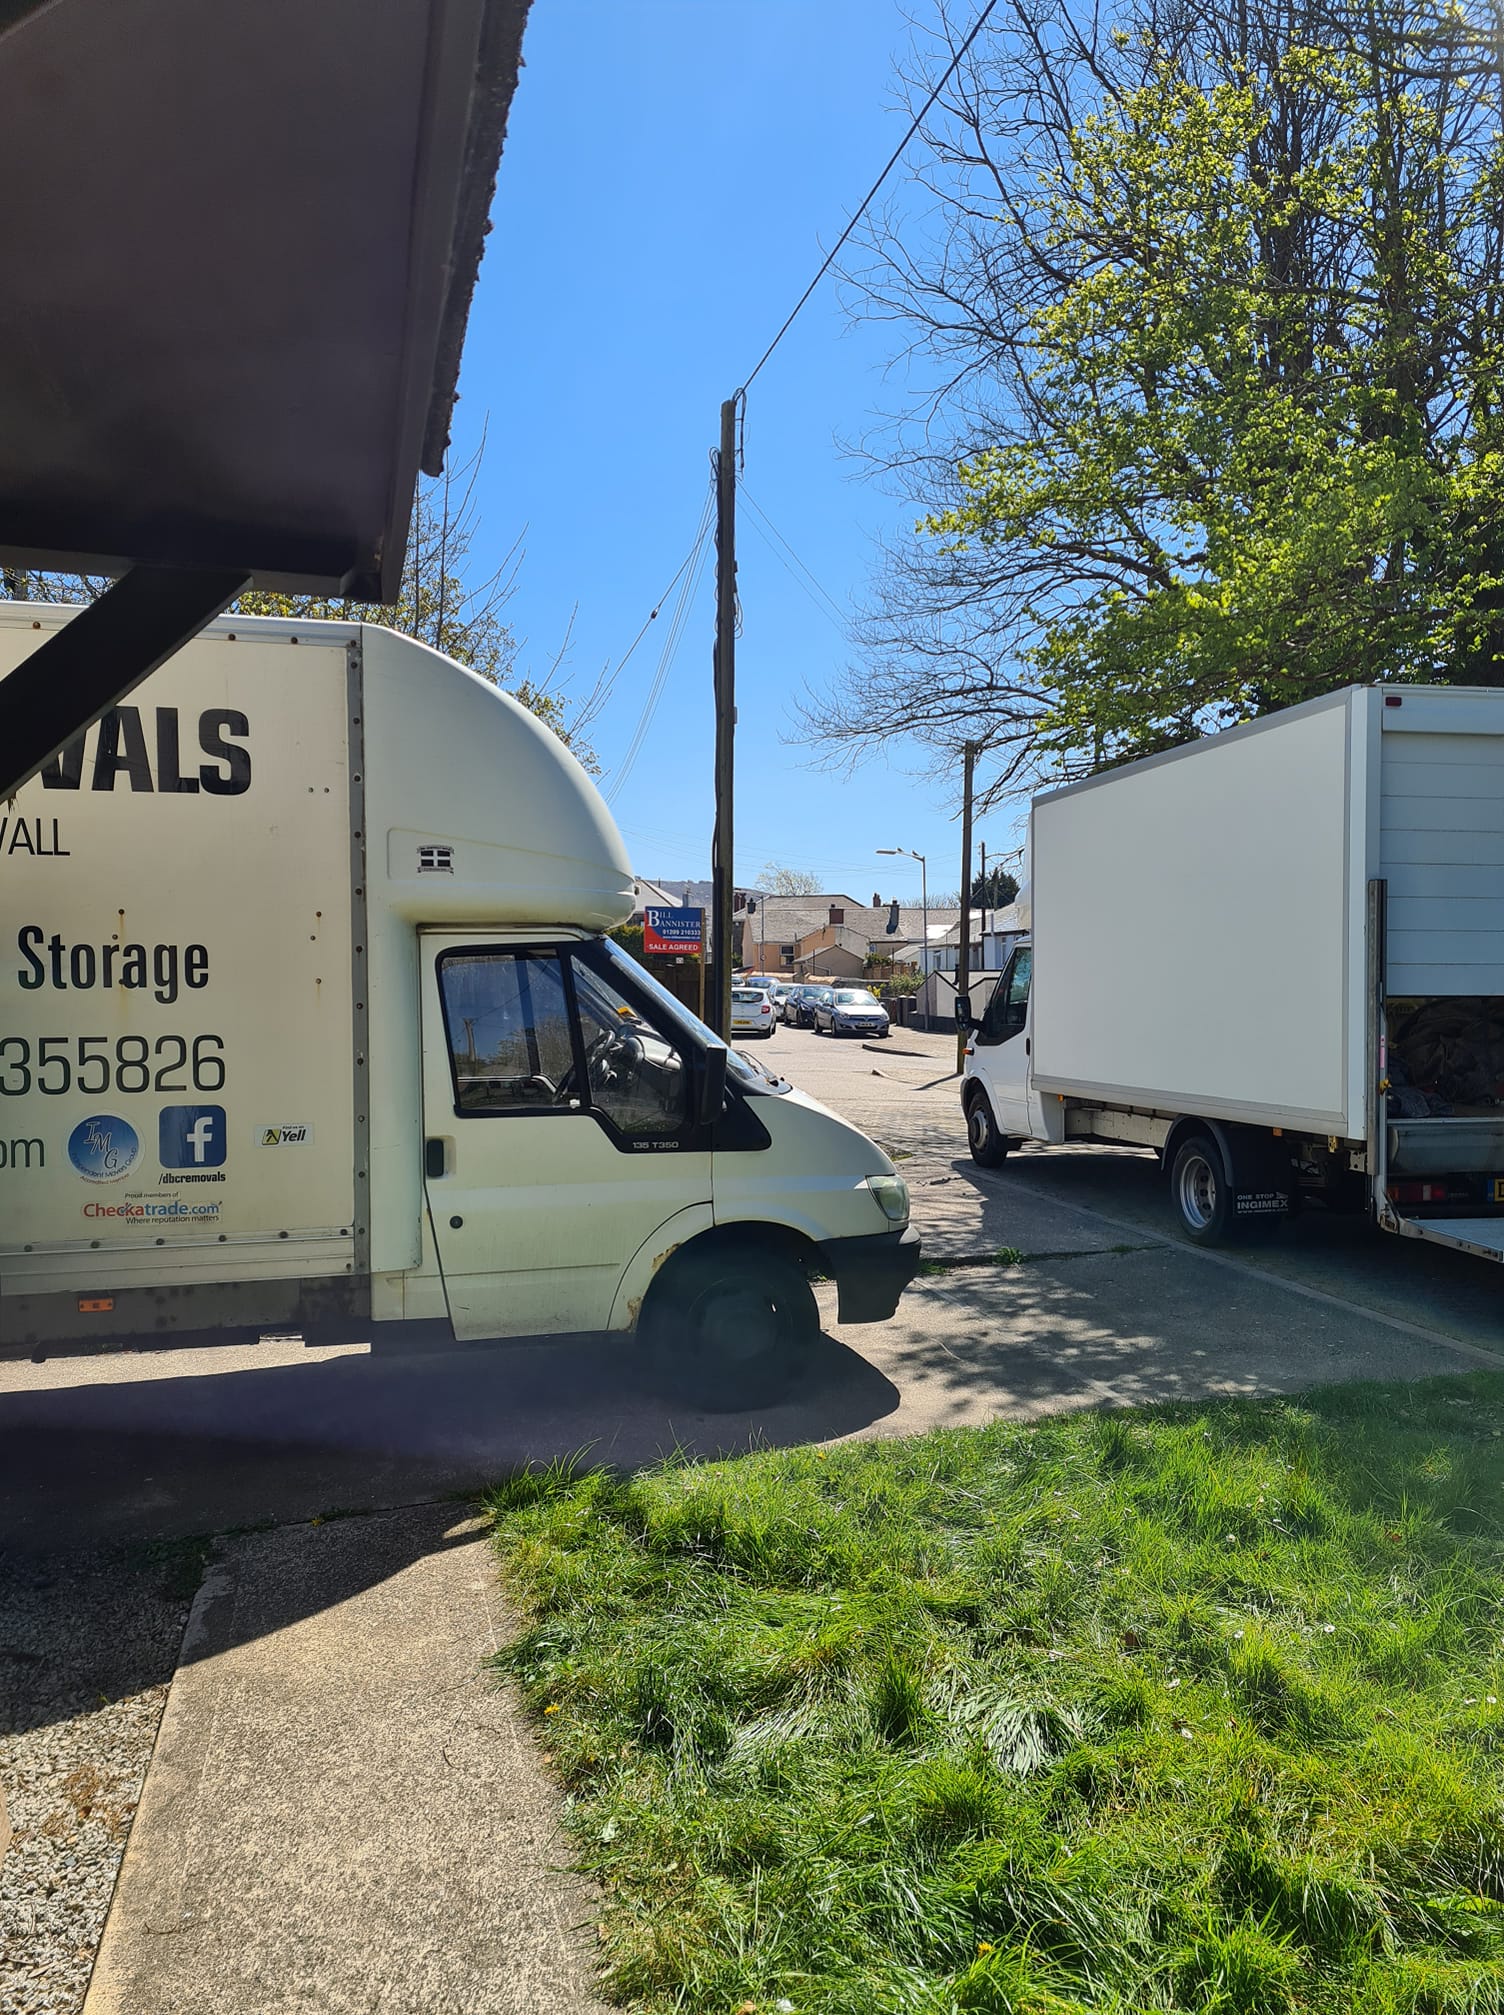 DBC REMOVALS HAYLE CORNWALL 